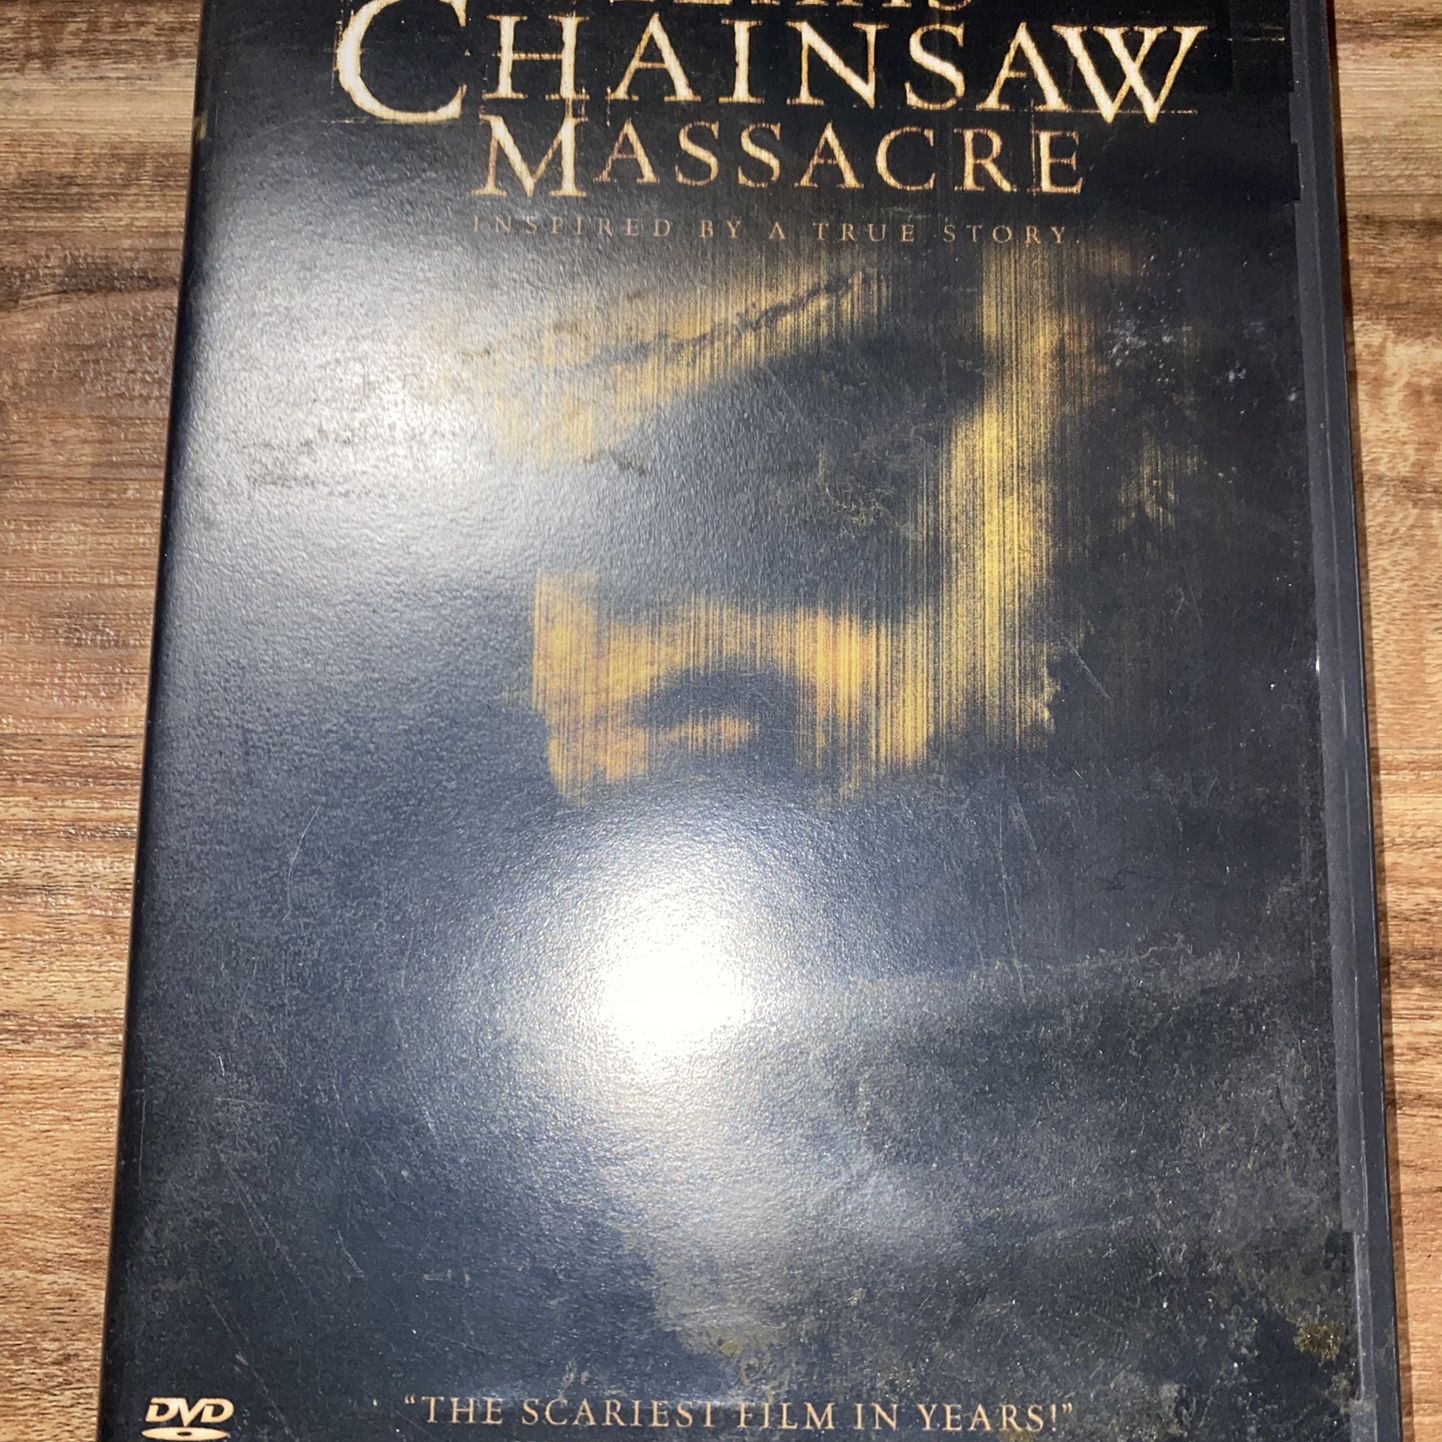 The Texas Chainsaw Massacre (2003) On DVD